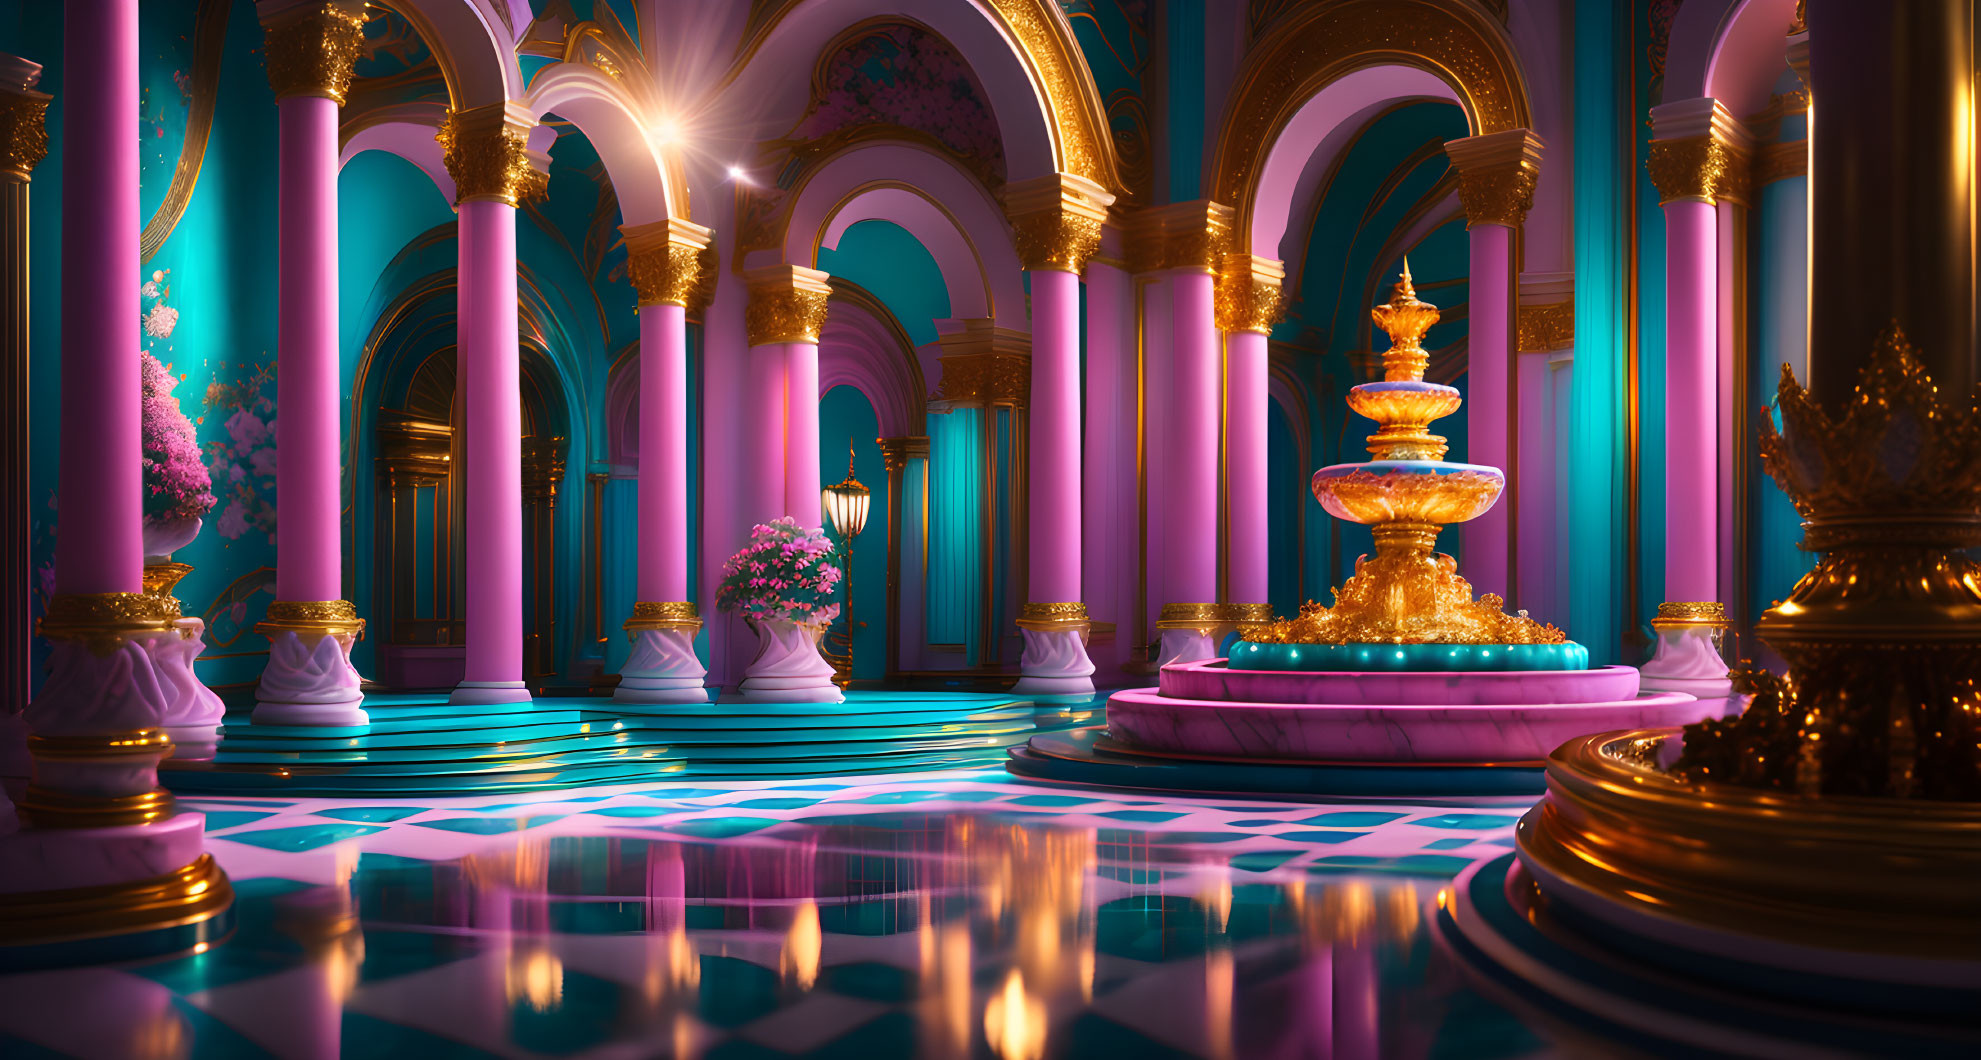 Fantasy palace interior with golden accents, fountain, pink trees, blue and pink lighting